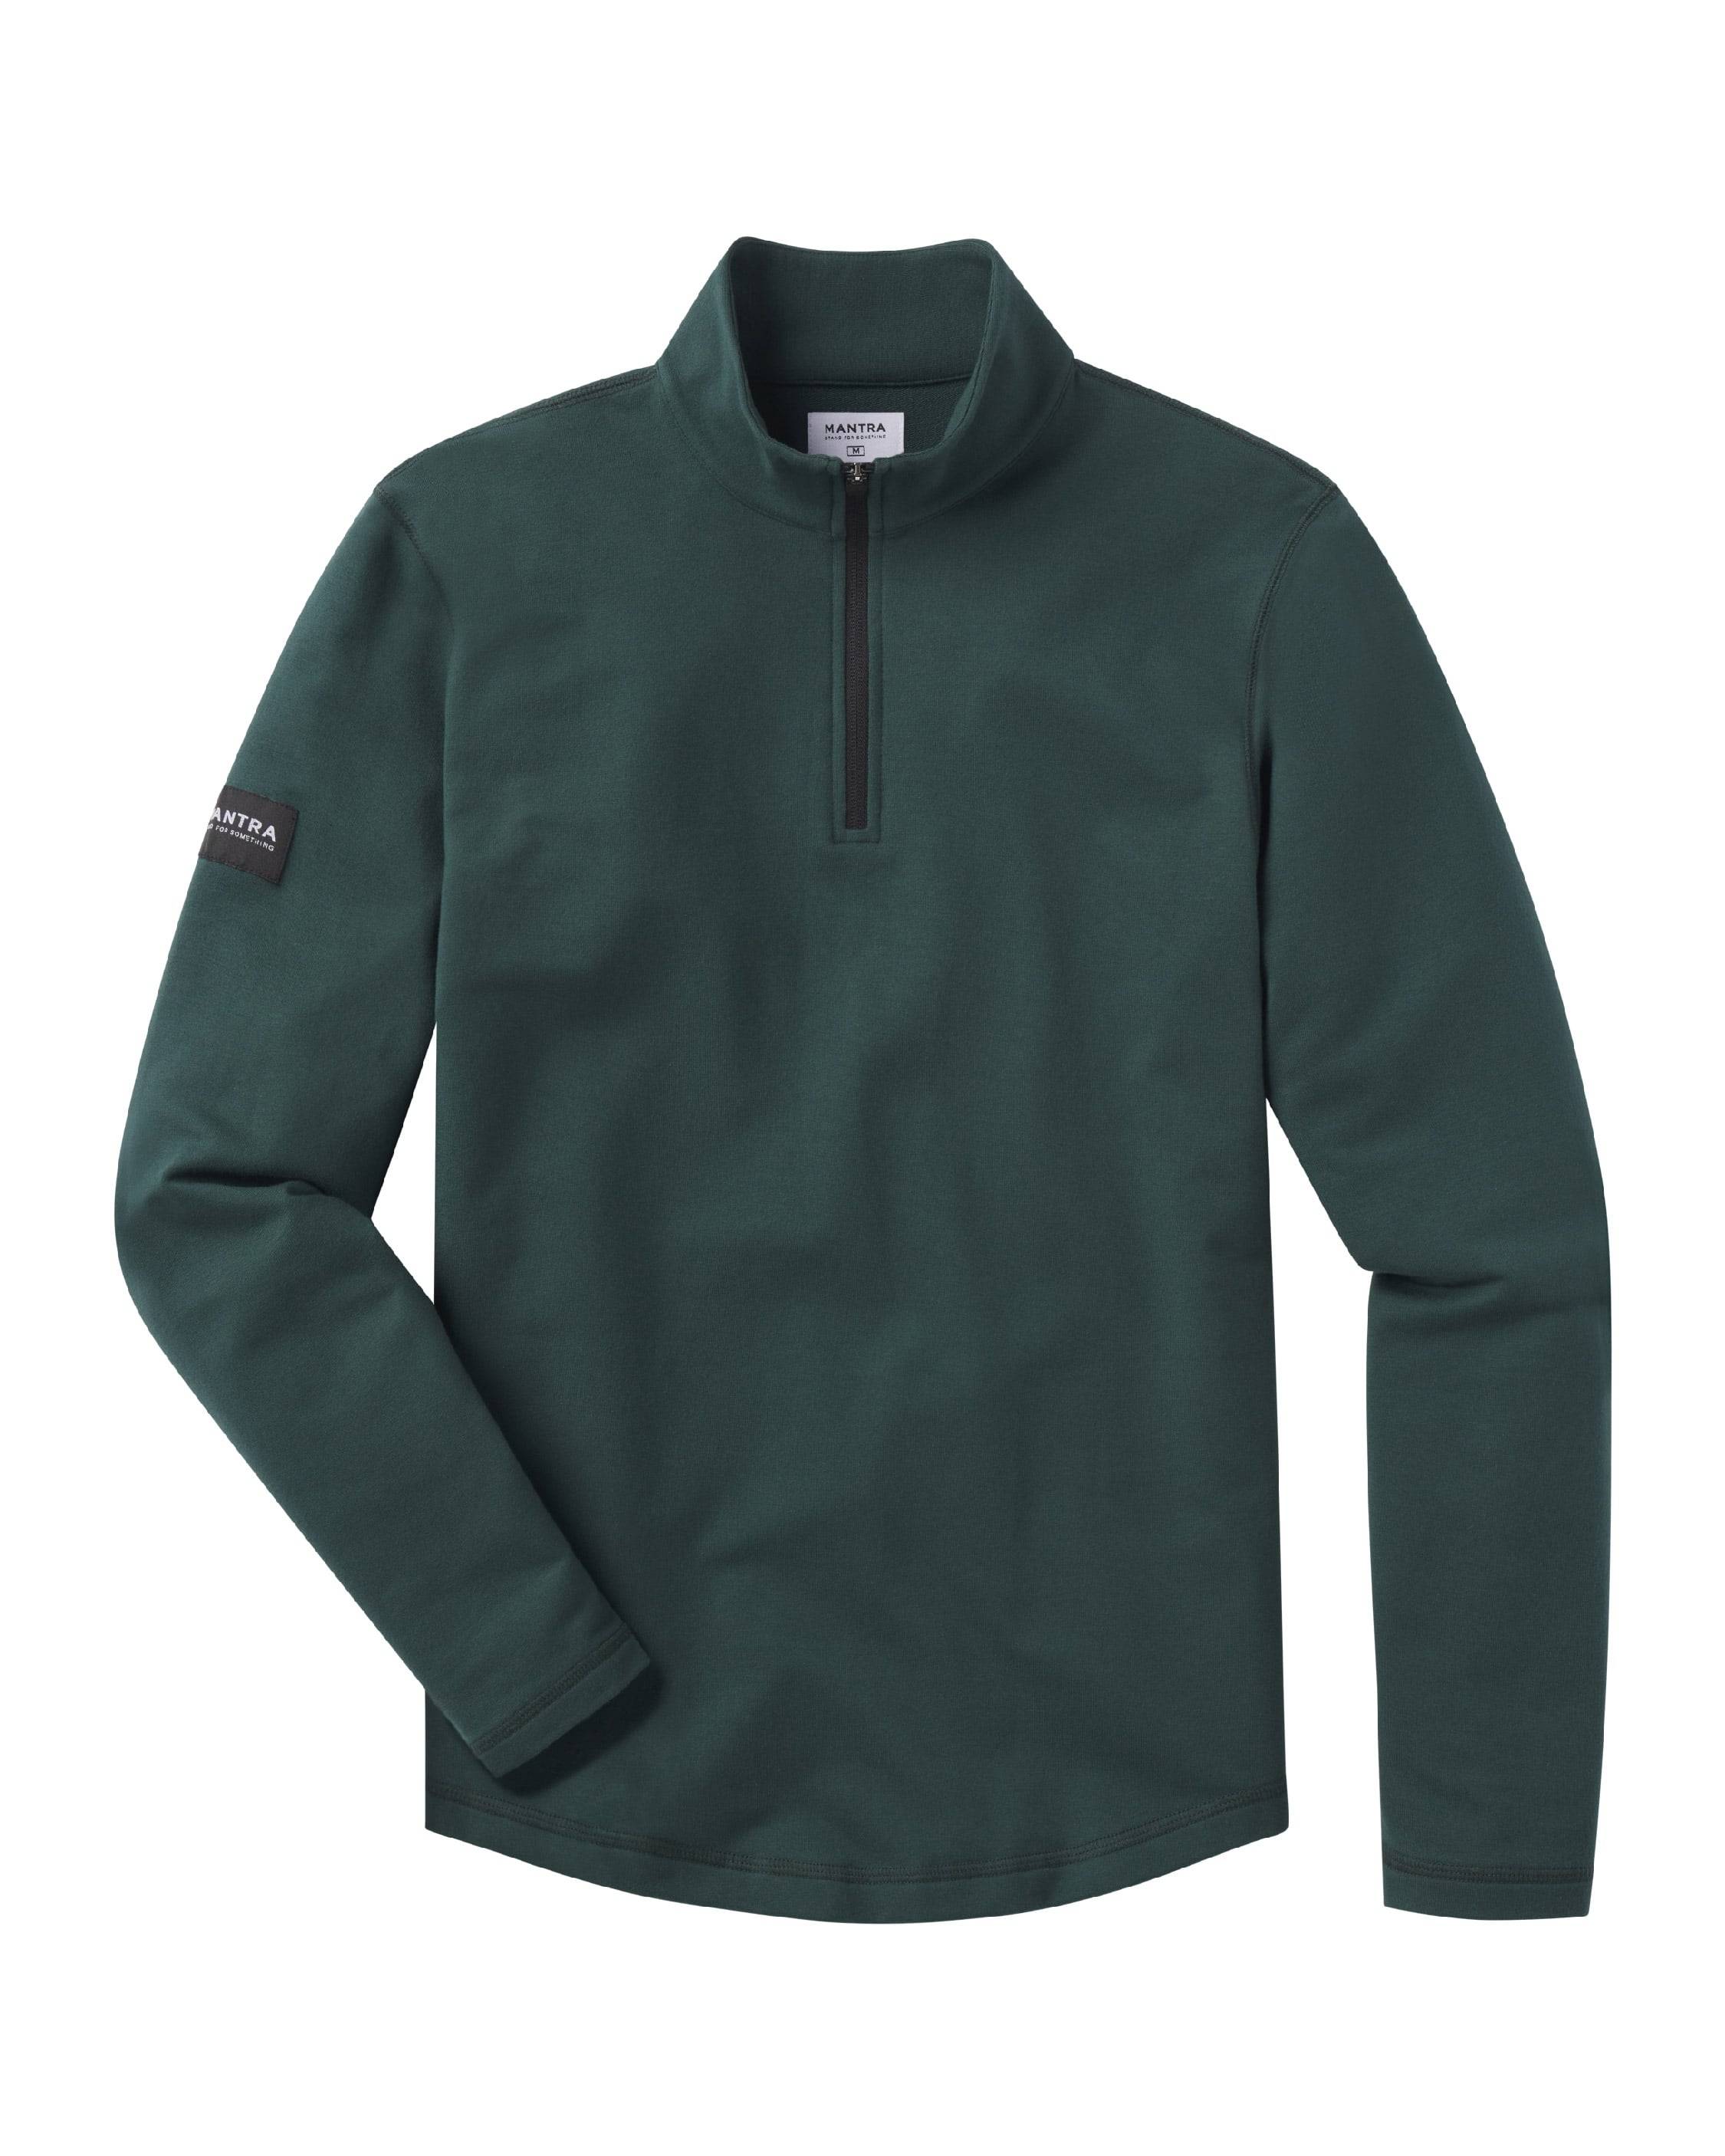 ESSENTIAL PULLOVER - QUARTER ZIP - FOREST color selector